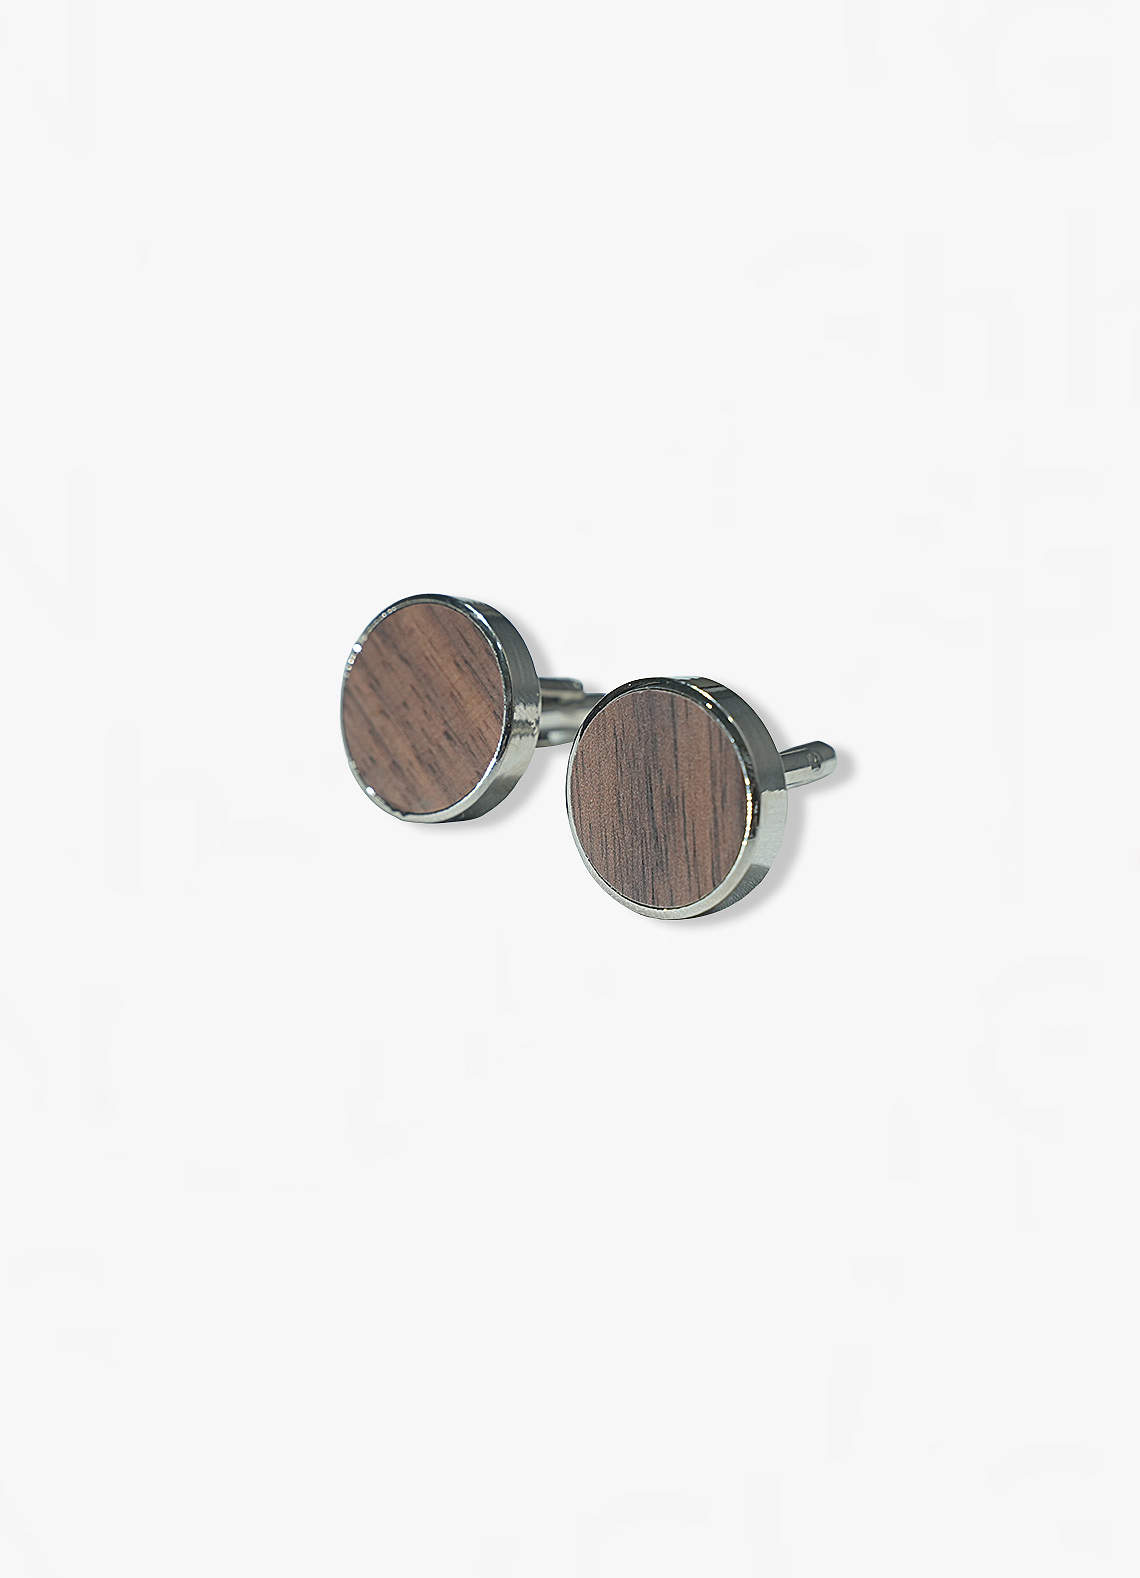 front Rounded Dark Wood Cuff Links